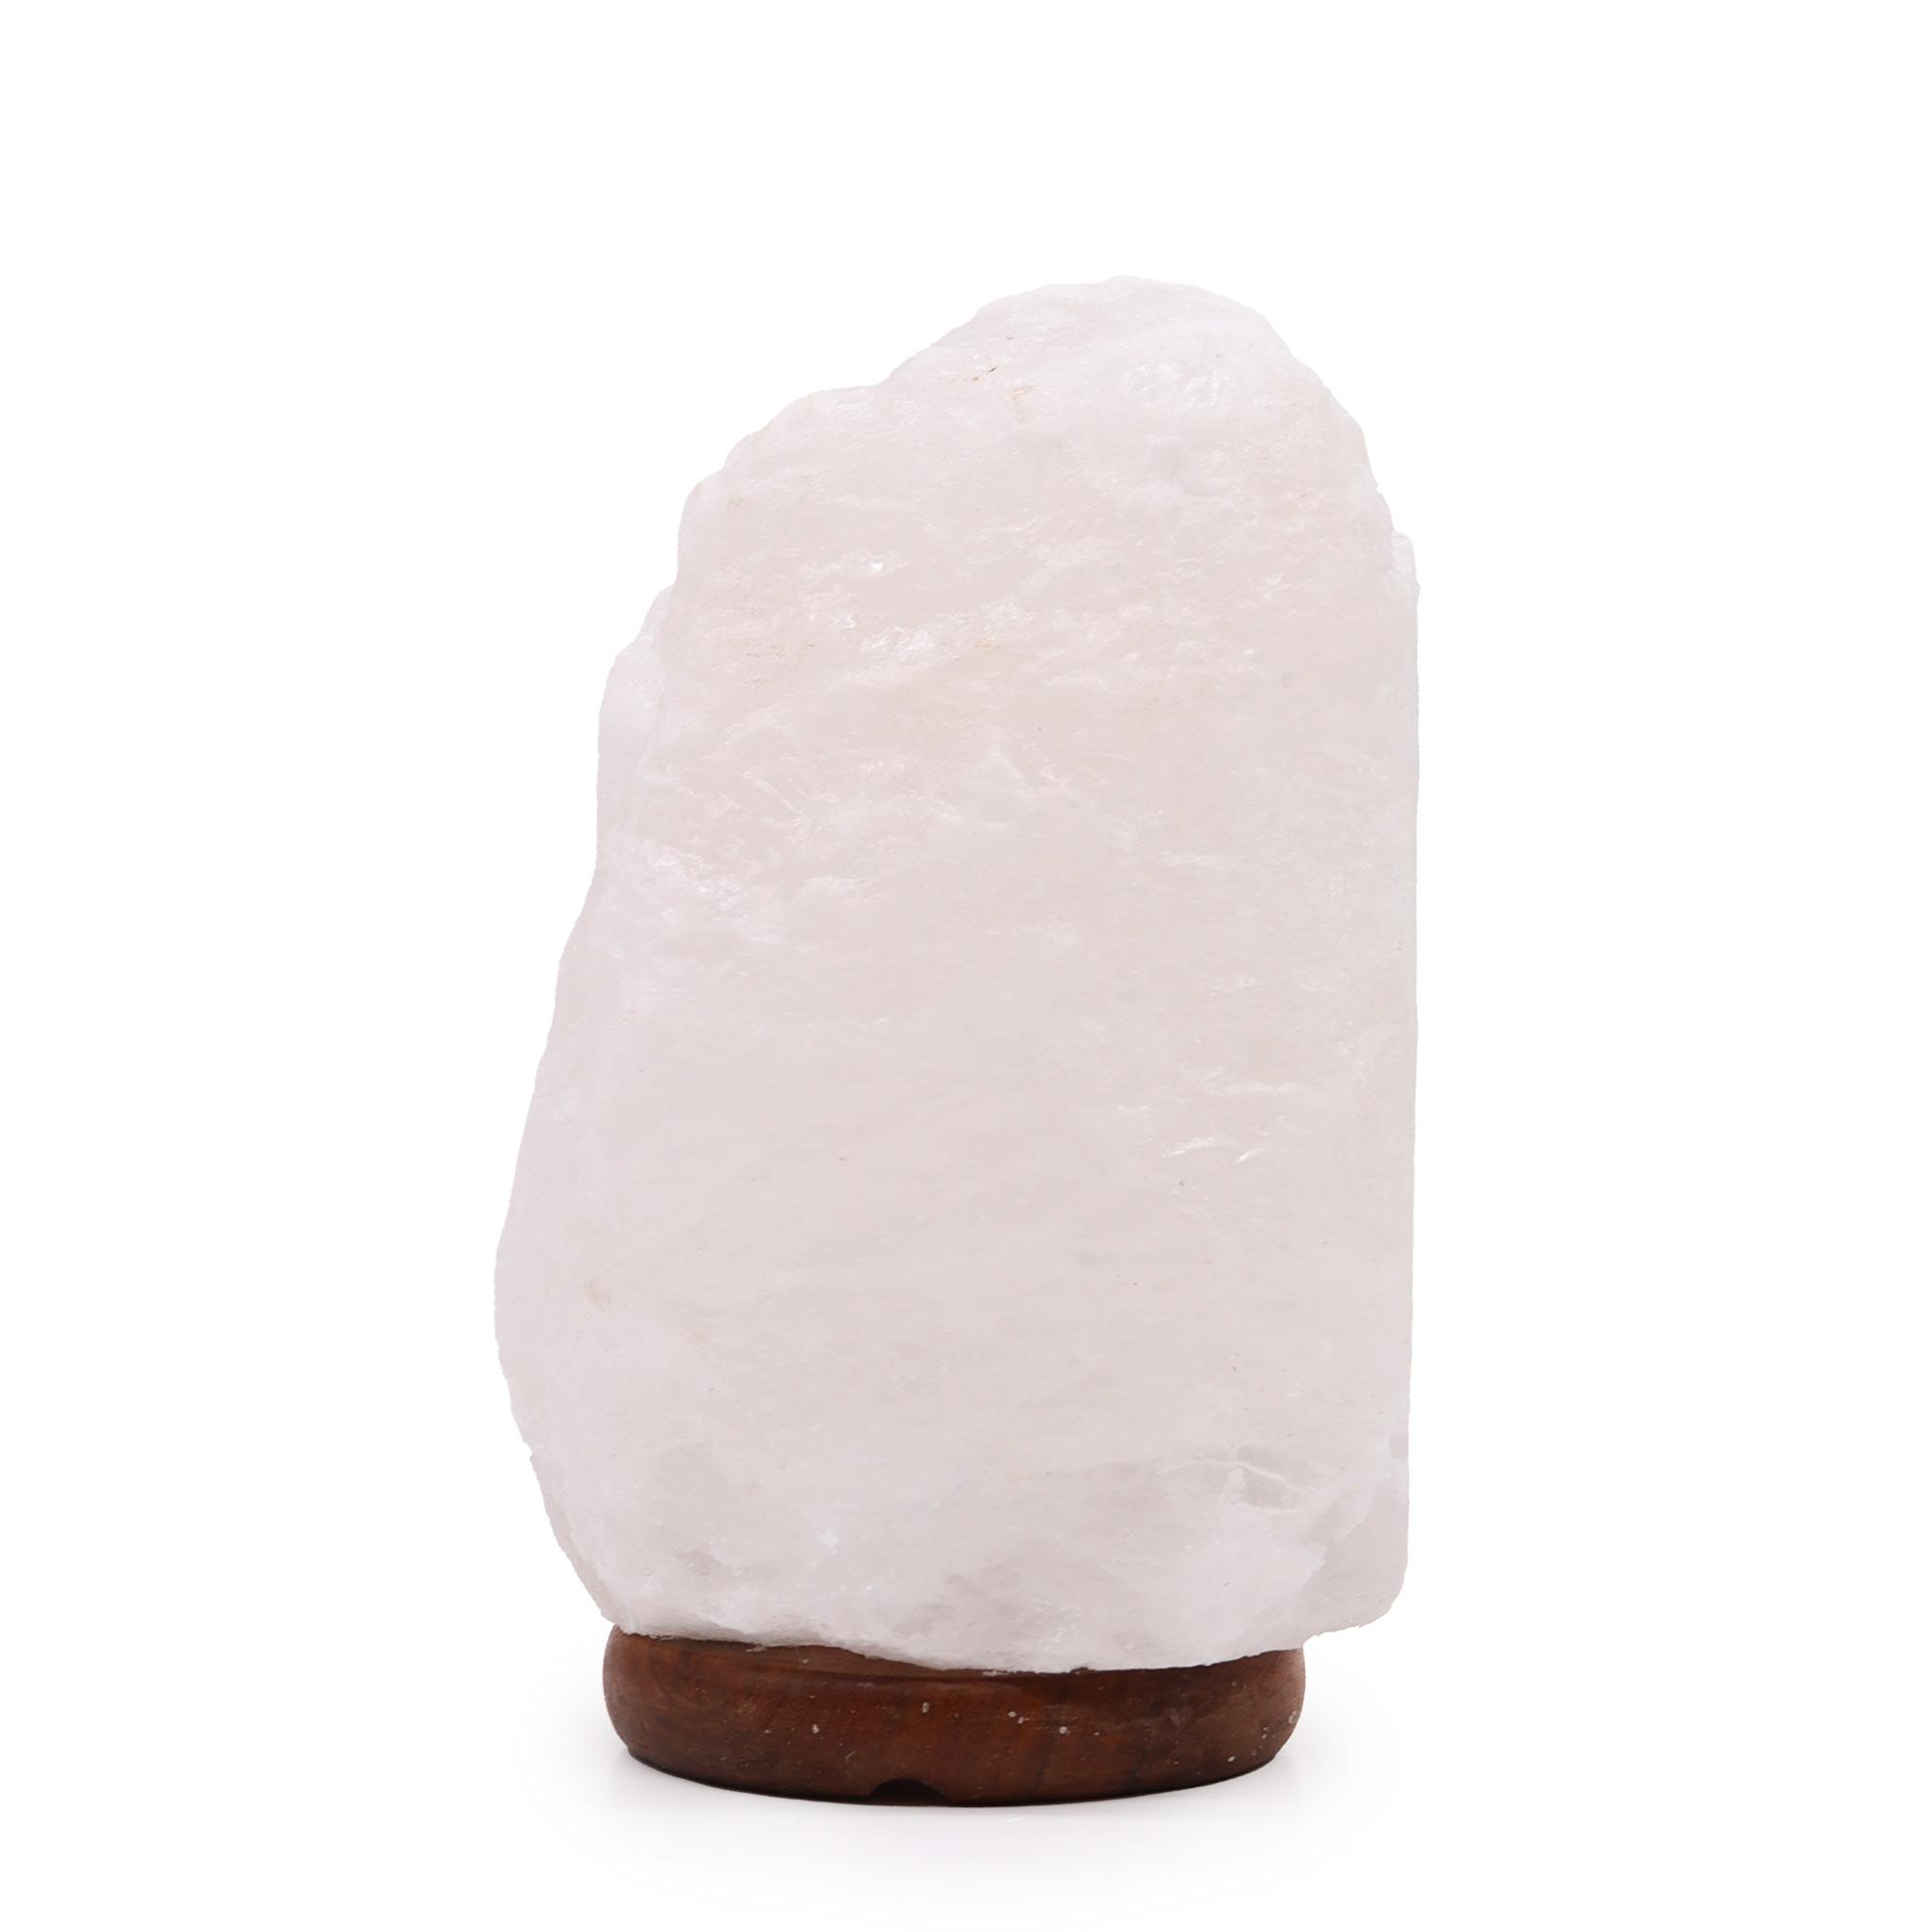 Crystal Rock Himalayan Salt Lamp with Wooden Base - 3 to 5 kg